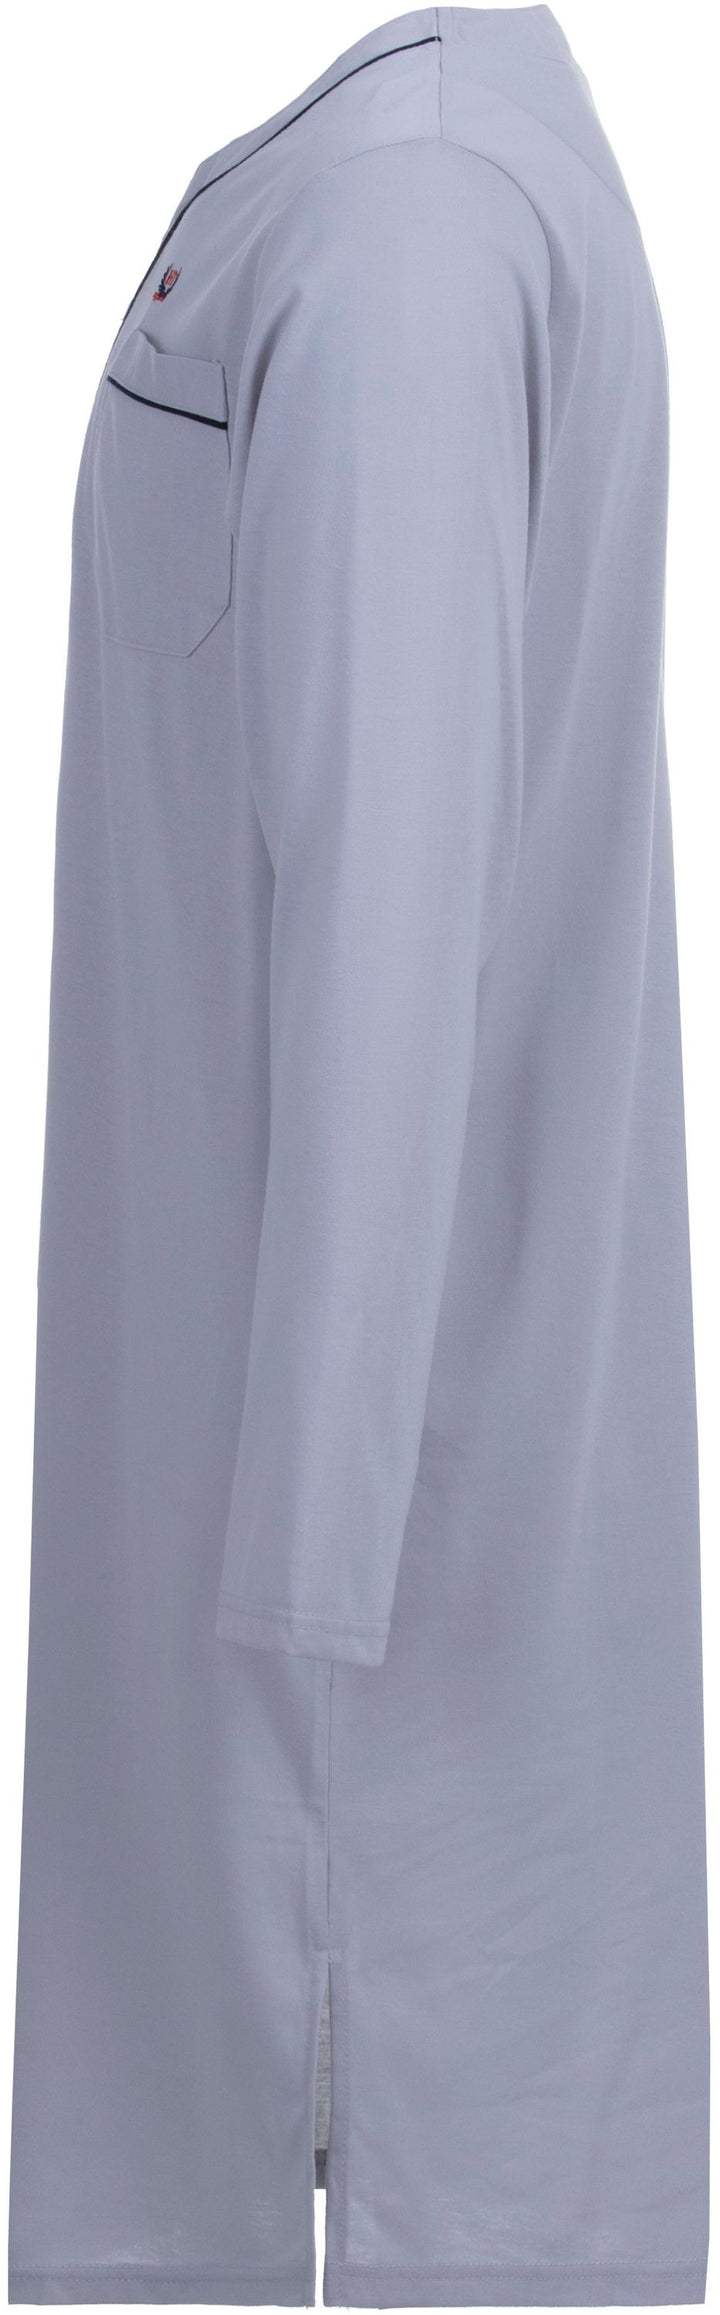 Long-sleeved nightgown - Uni